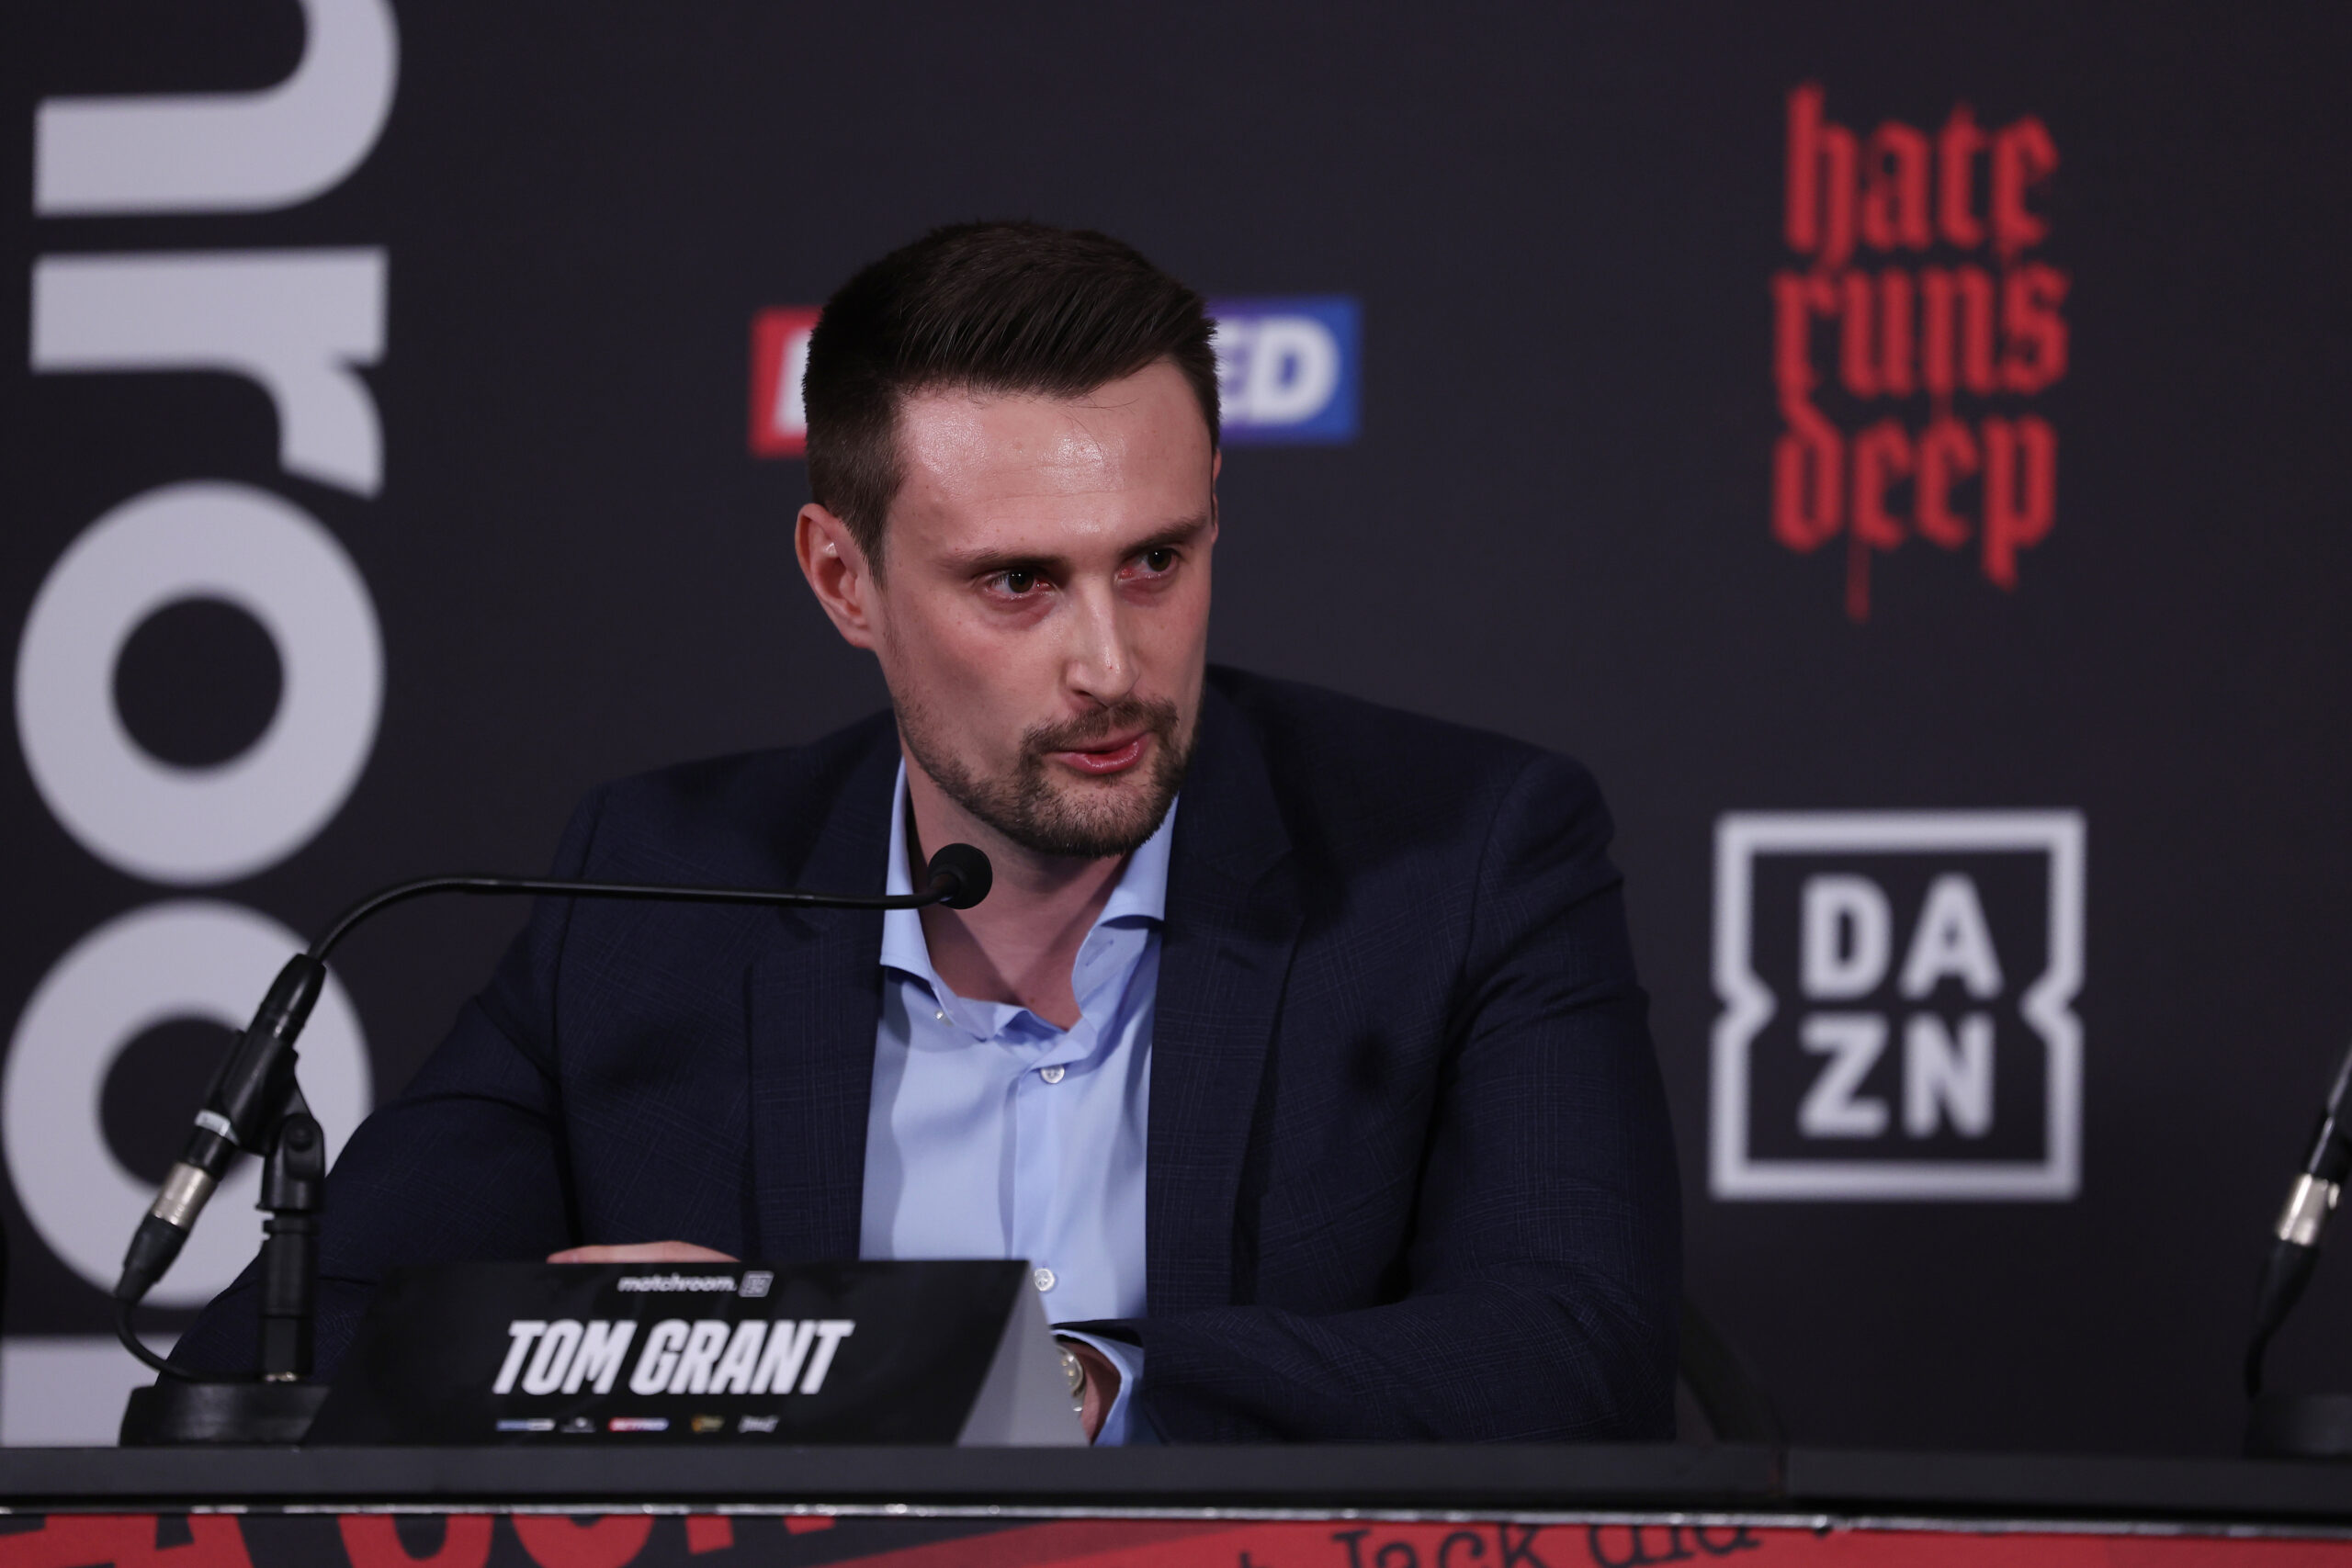 Edinburgh, UK: Josh Taylor and Jack Catterall Launch Press Conference ahead of their Super Lightweight rematch on Saturday April 27.